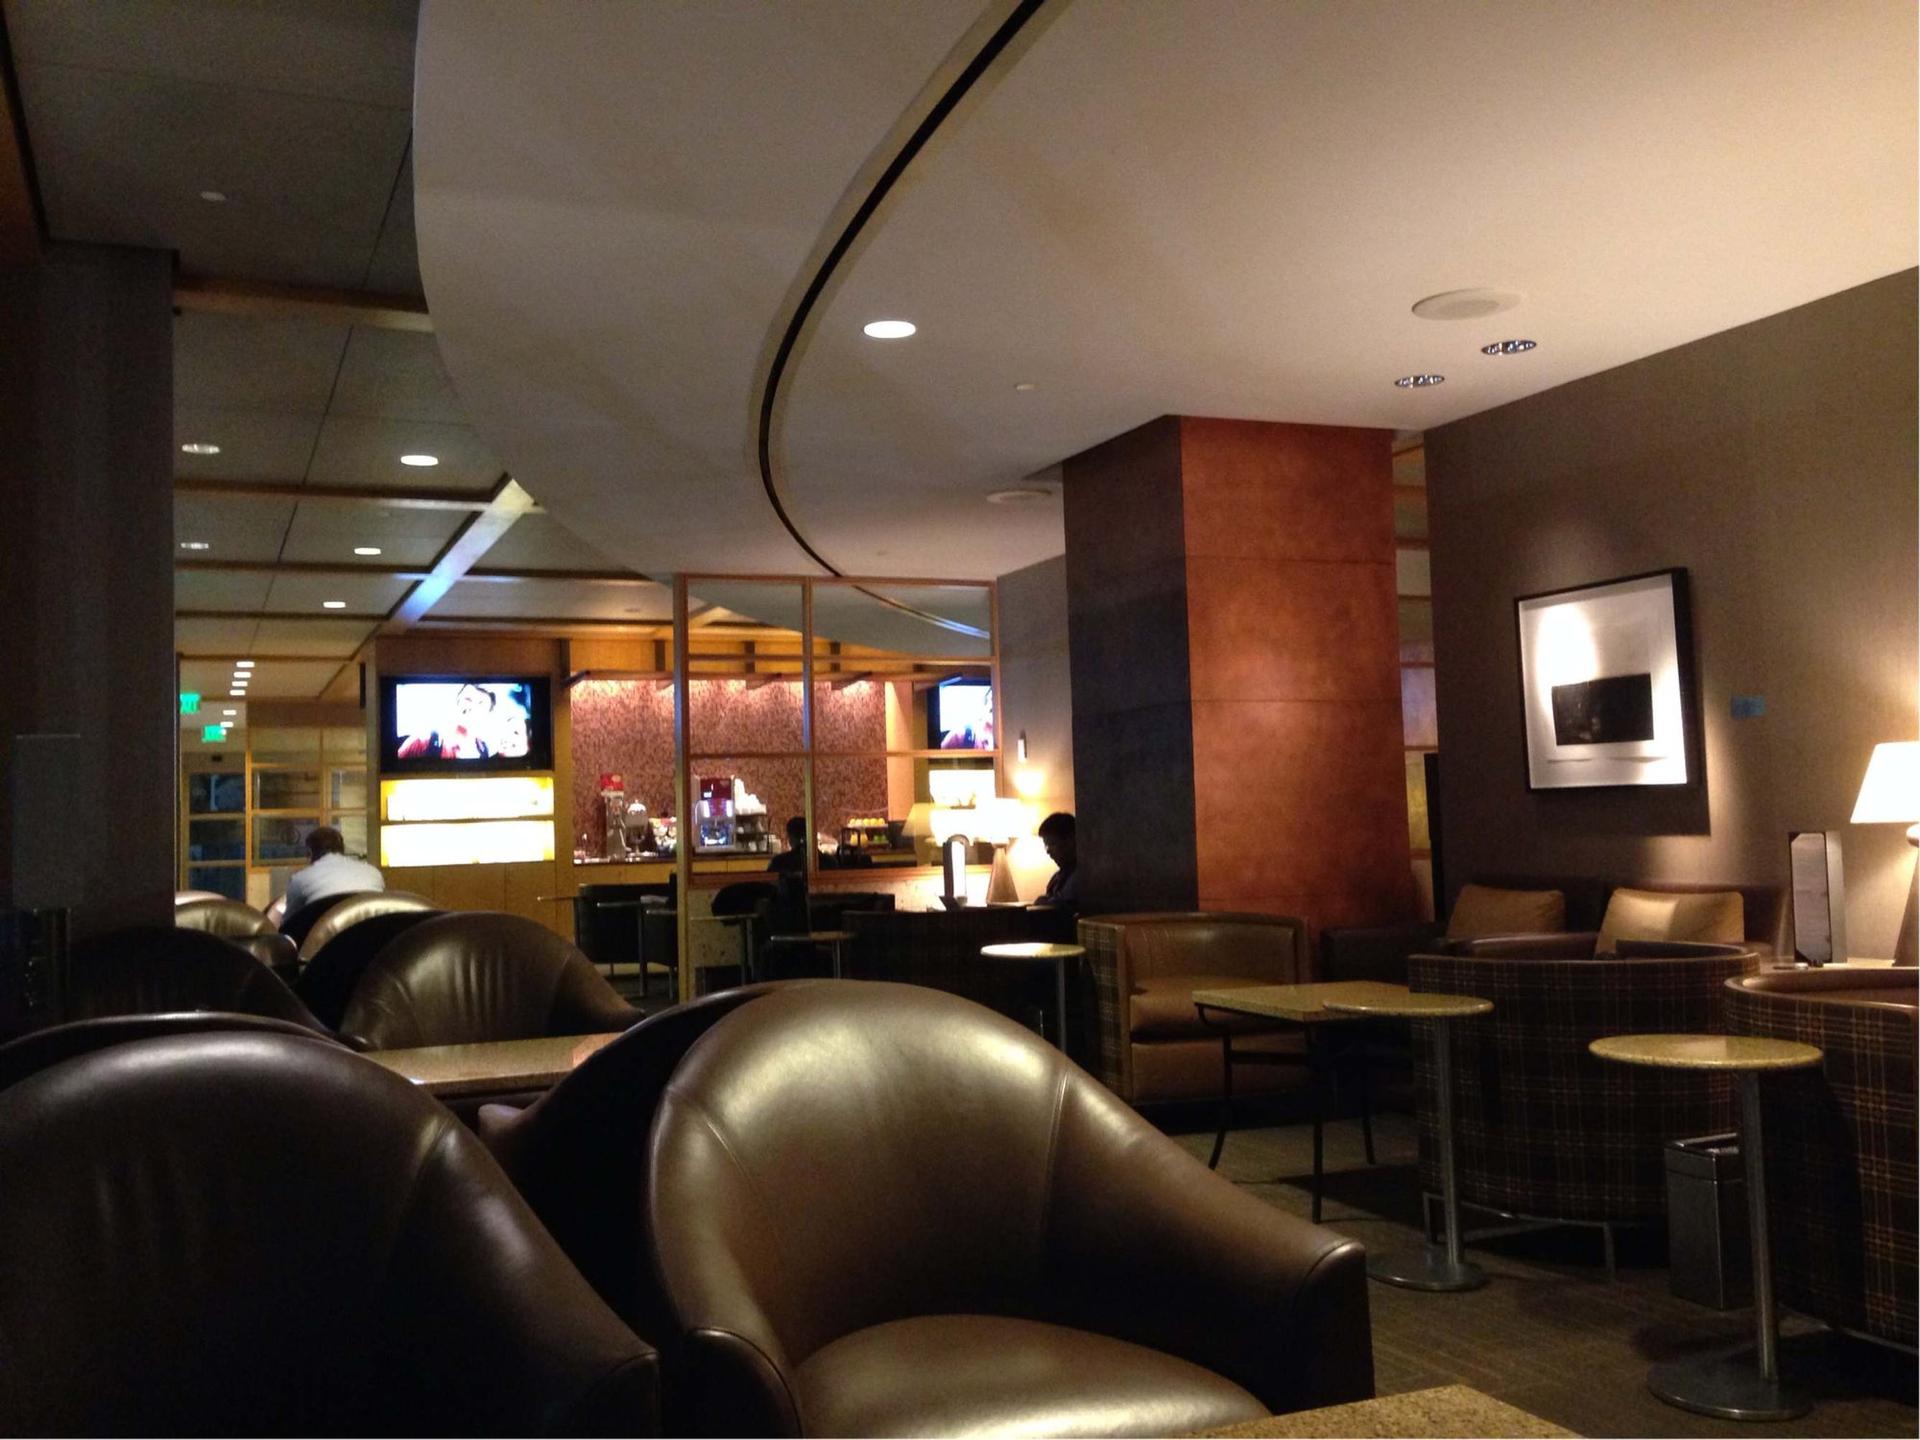 American Airlines Admirals Club image 1 of 14